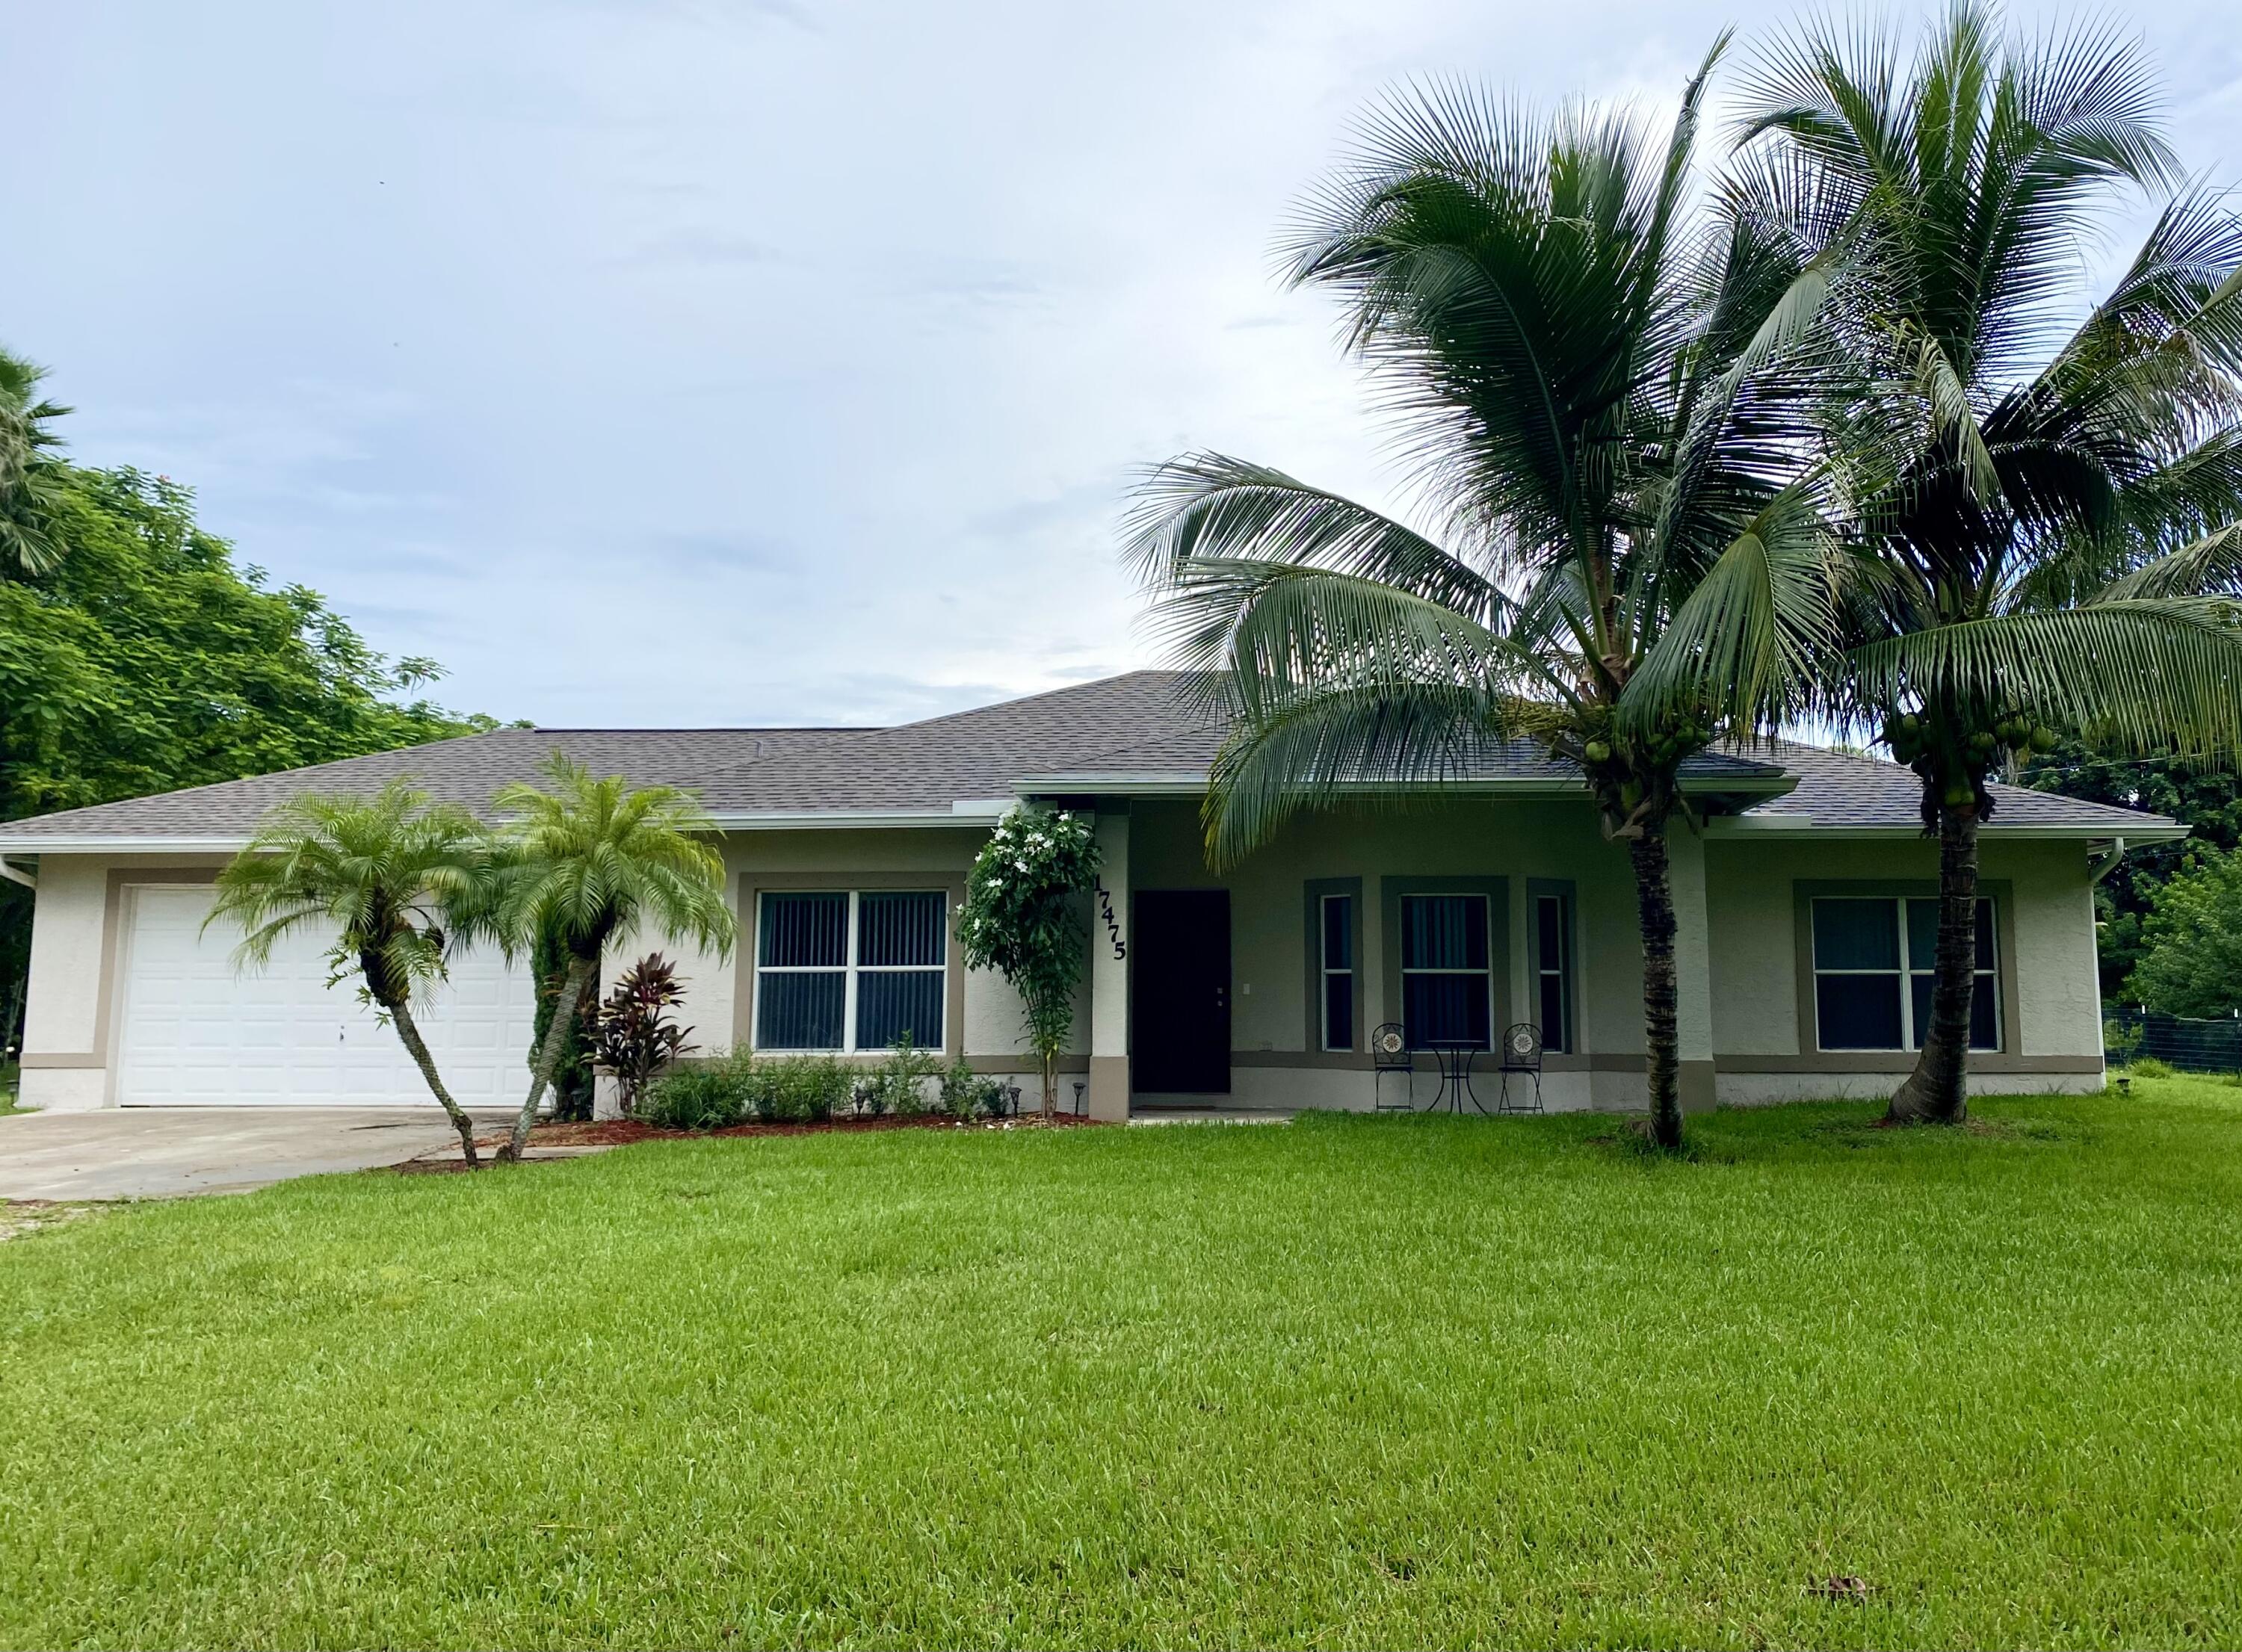 Have it all with this CBS 3 bed 2 bath 2 car Garage POOL home with a 3 STALL Horse Barn (water & electric) on a beautiful flat high & dry 1.4 Acre corner lot in Loxahatchee. Open Floor Plan, High Volume Ceilings, 2020 Roof, 2022 AC, 2022 Complete LVP Flooring with zero transitions, 2022 Updated Master Bathroom. Property has two driveways to accommodate large horse trailers, boats, RV's. Completely fenced and on a paved road. Minutes away from some of the best equestrian trails and parks in the area, shopping, & dining.